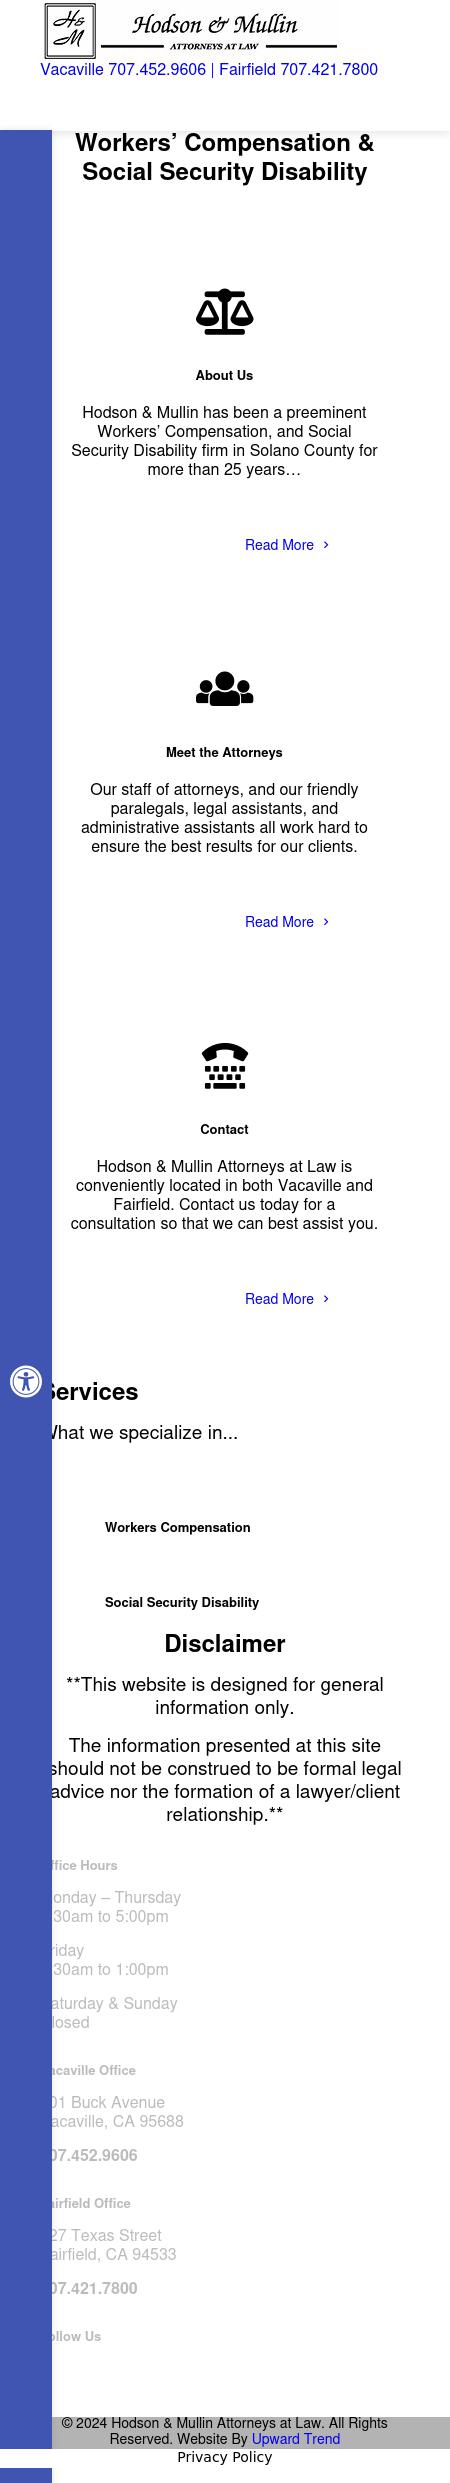 Hodson & Mullin Attorneys At Law - Vacaville CA Lawyers